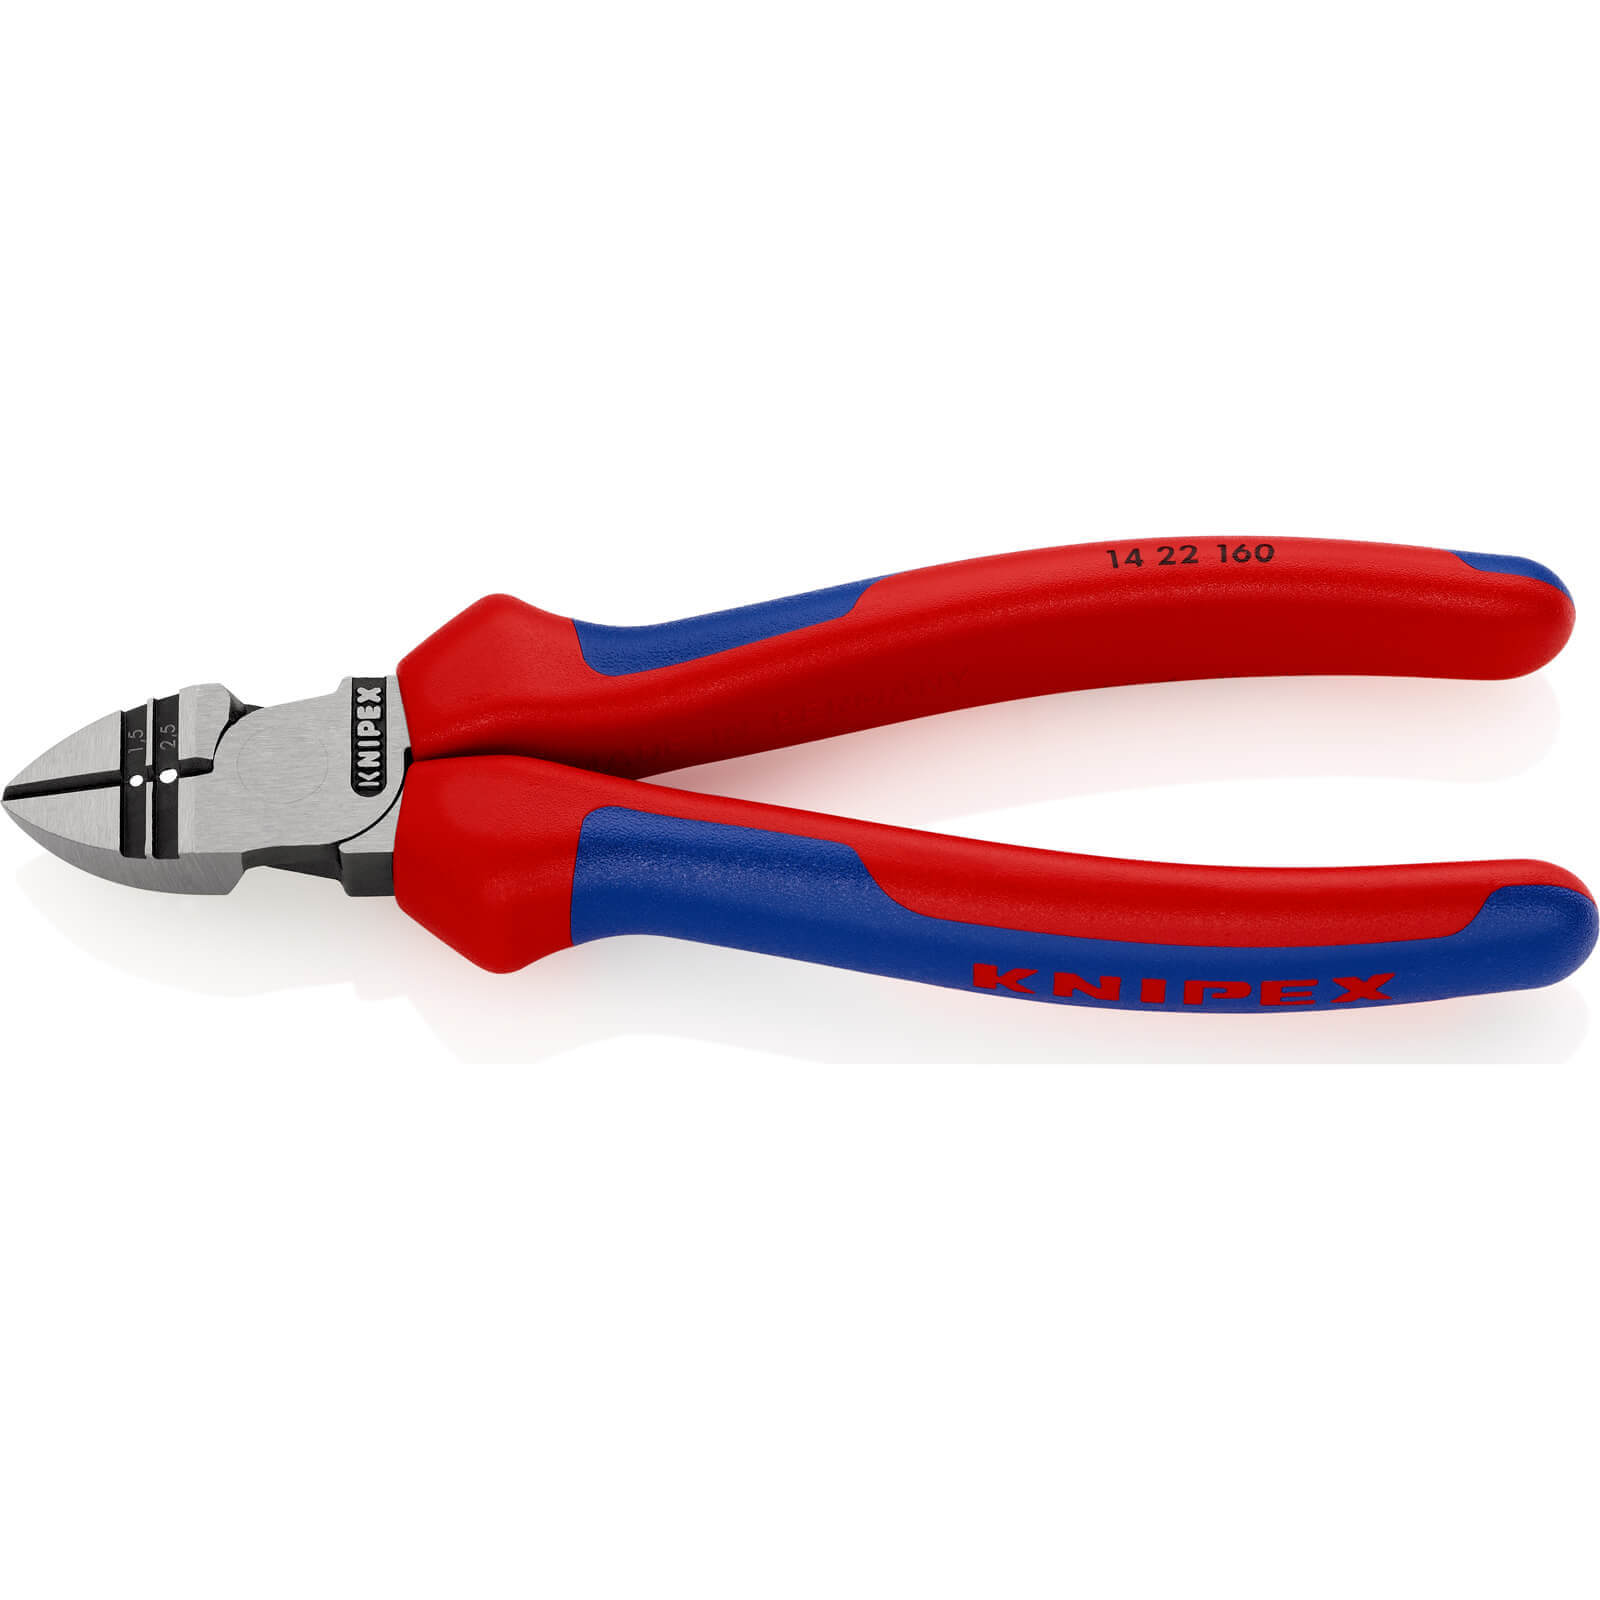 Photos - Utility Knife KNIPEX 14 22 Wire Stripping and Cutting Pliers 160mm 14 22 160 SB 